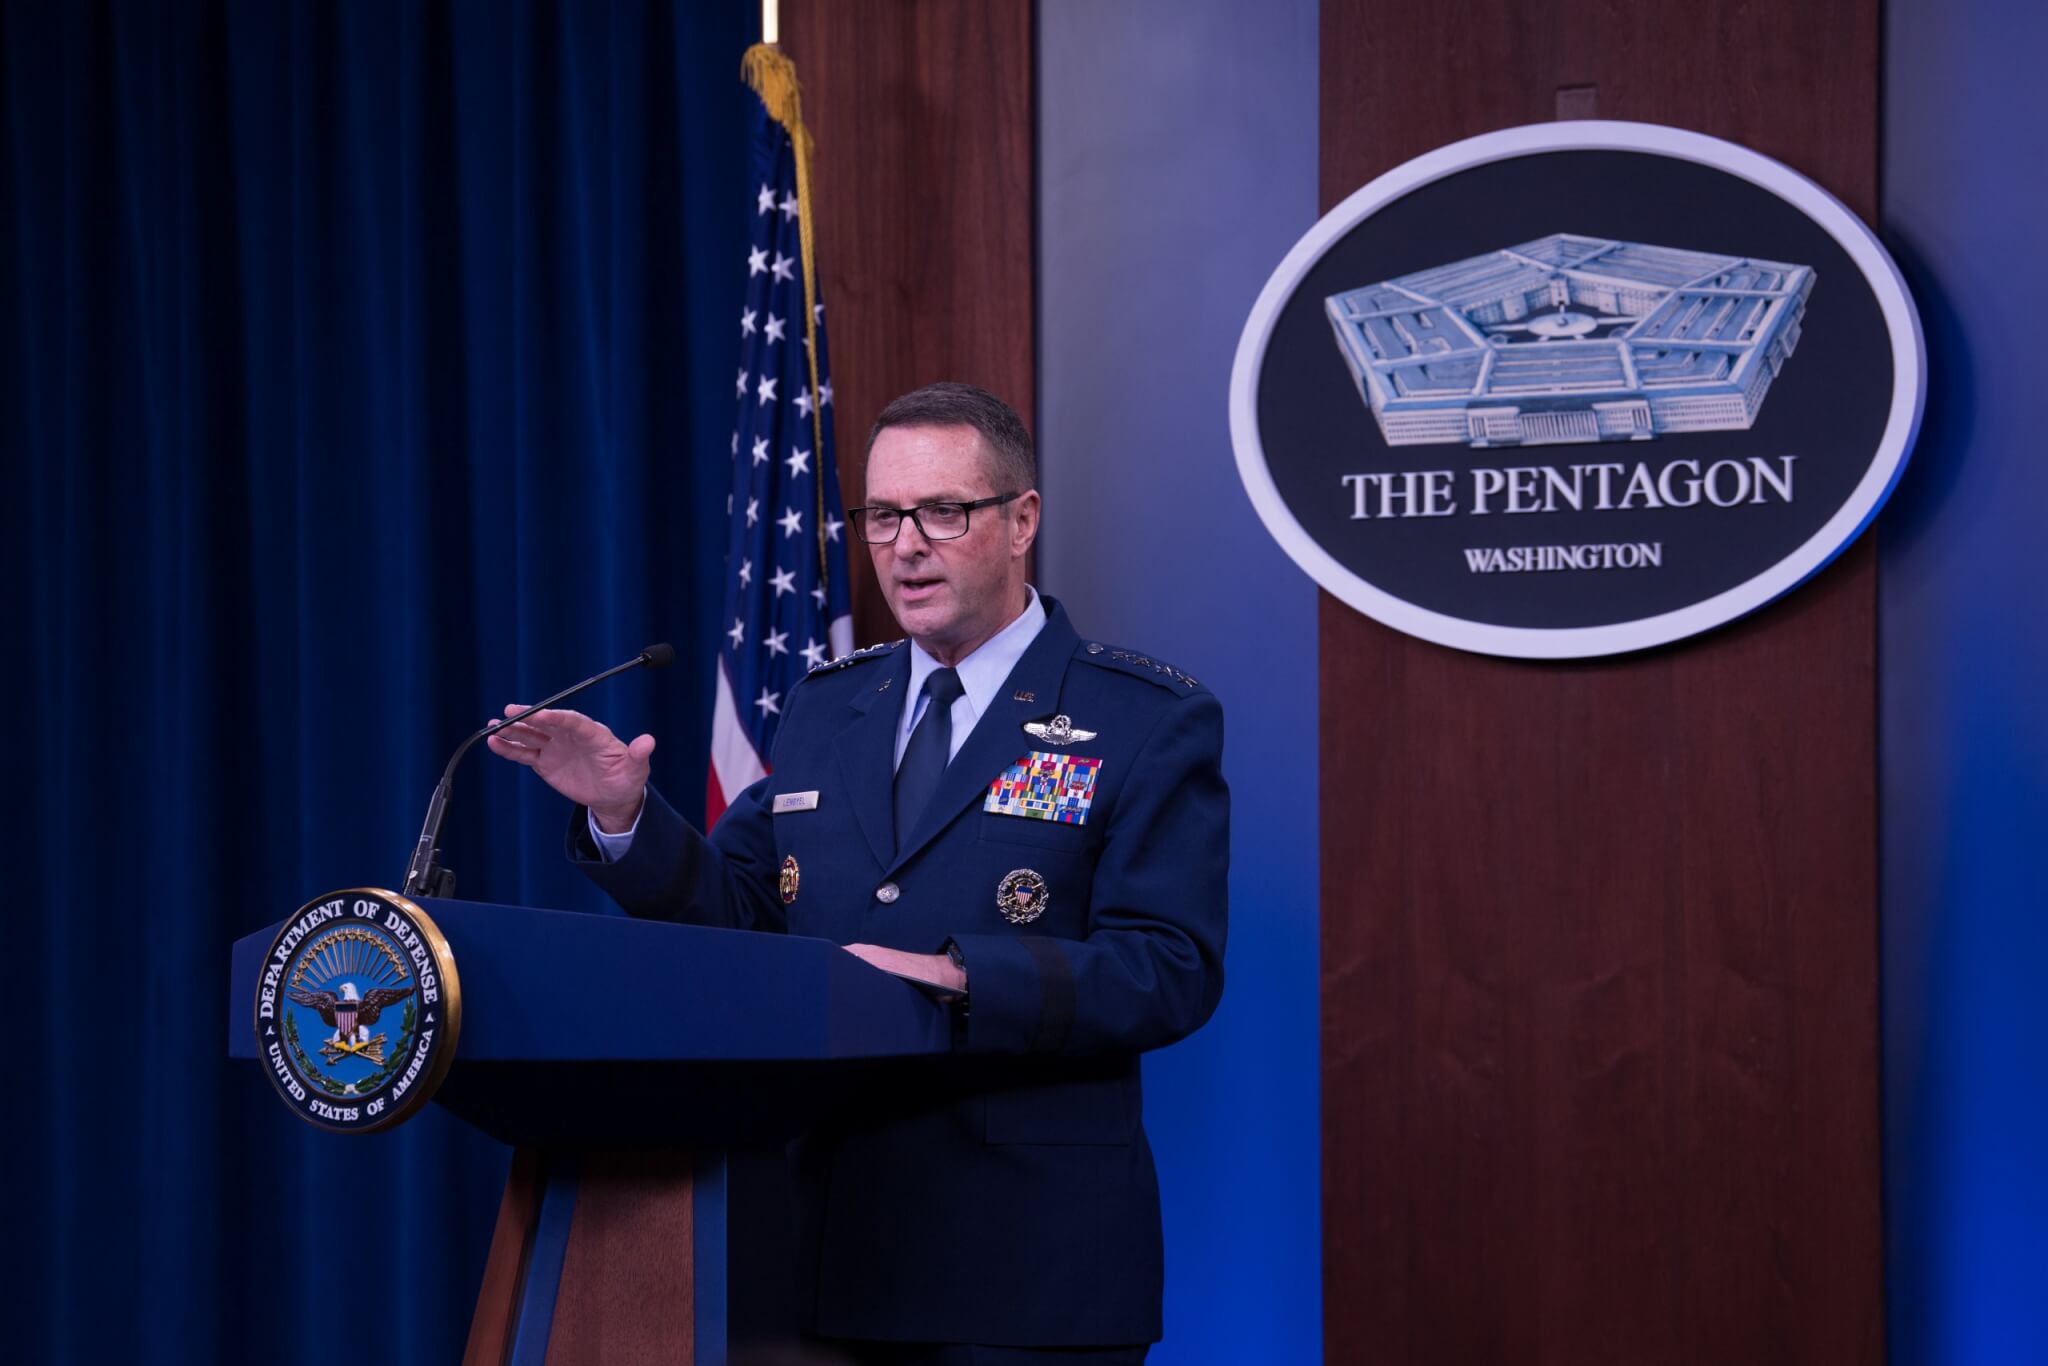 Chief of the National Guard Bureau Air Force Gen. Joseph L. Lengyel speaks to members of the press at the Pentagon Briefing Room. Photo by Army Staff Sgt. Nicole Mejia.